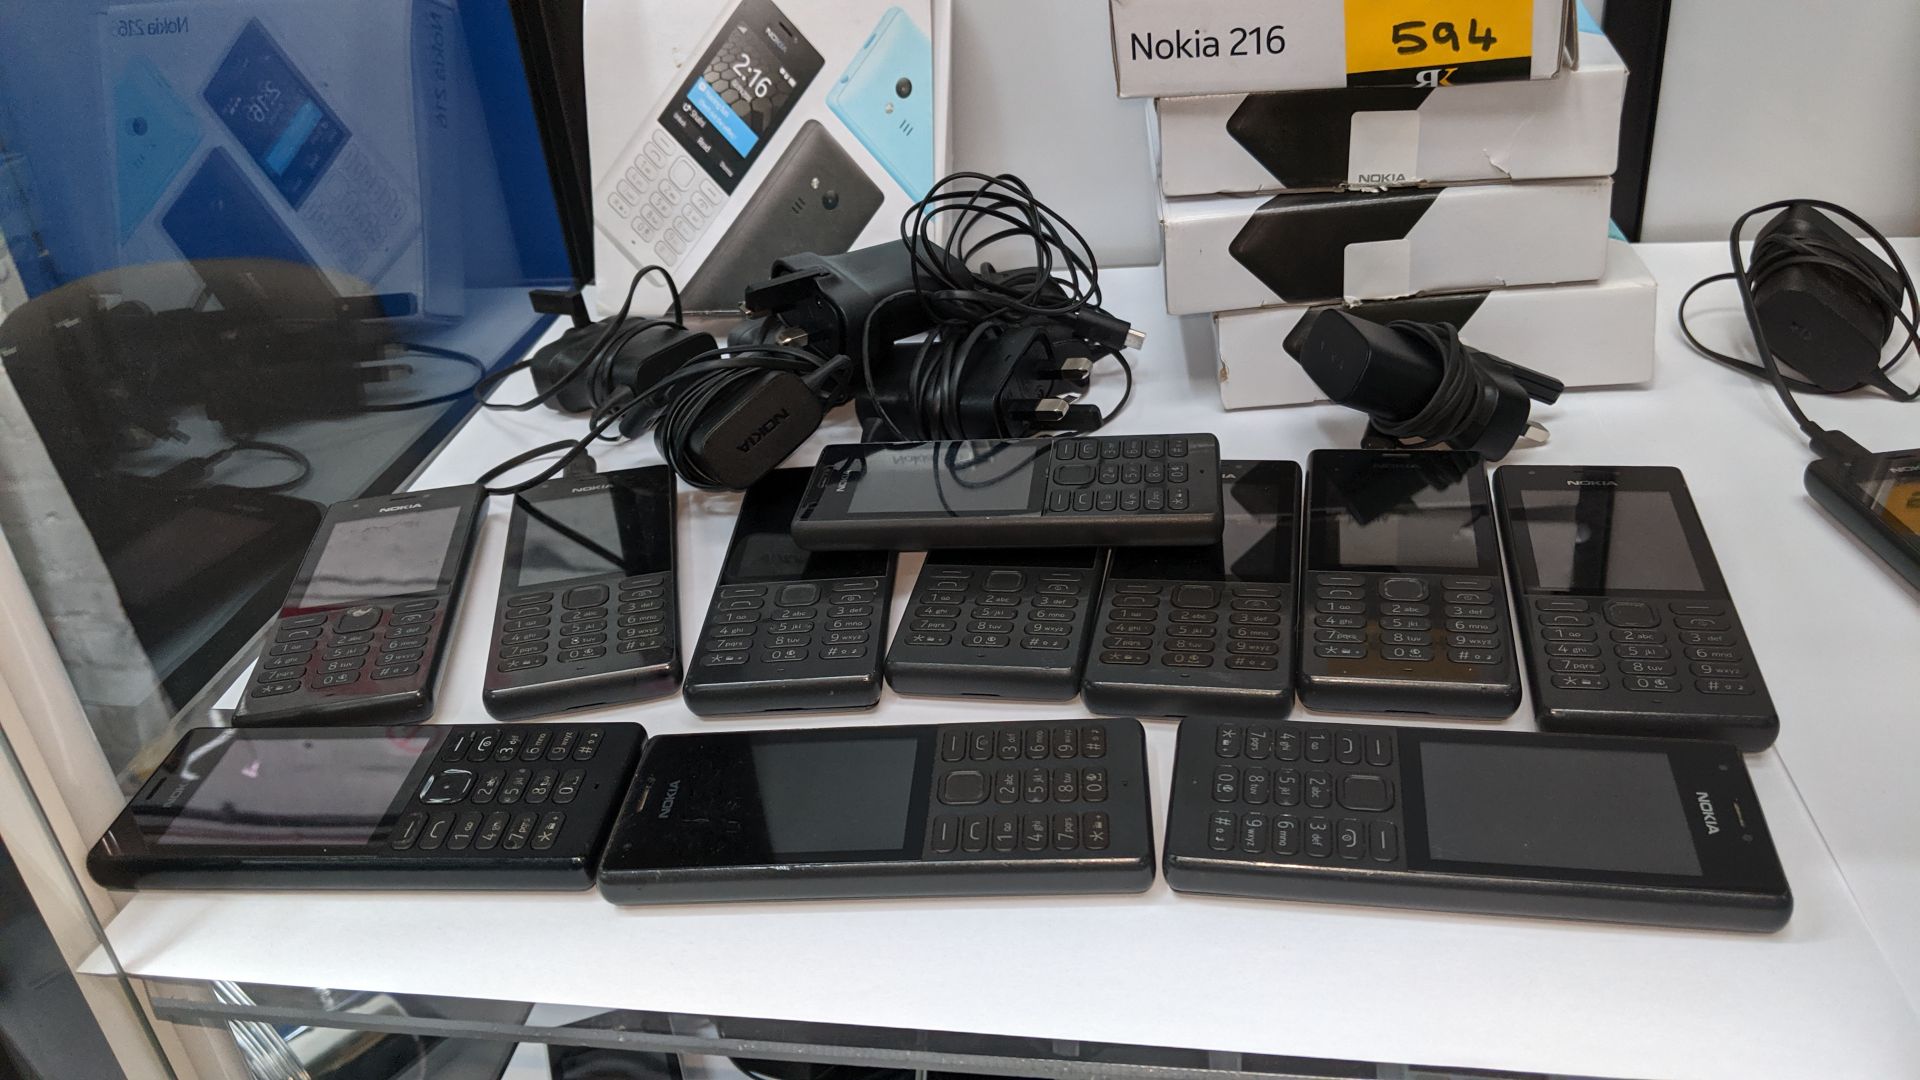 11 off Nokia 216 black mobile phones including 7 chargers & 5 boxes. We believe these phones were - Image 7 of 7